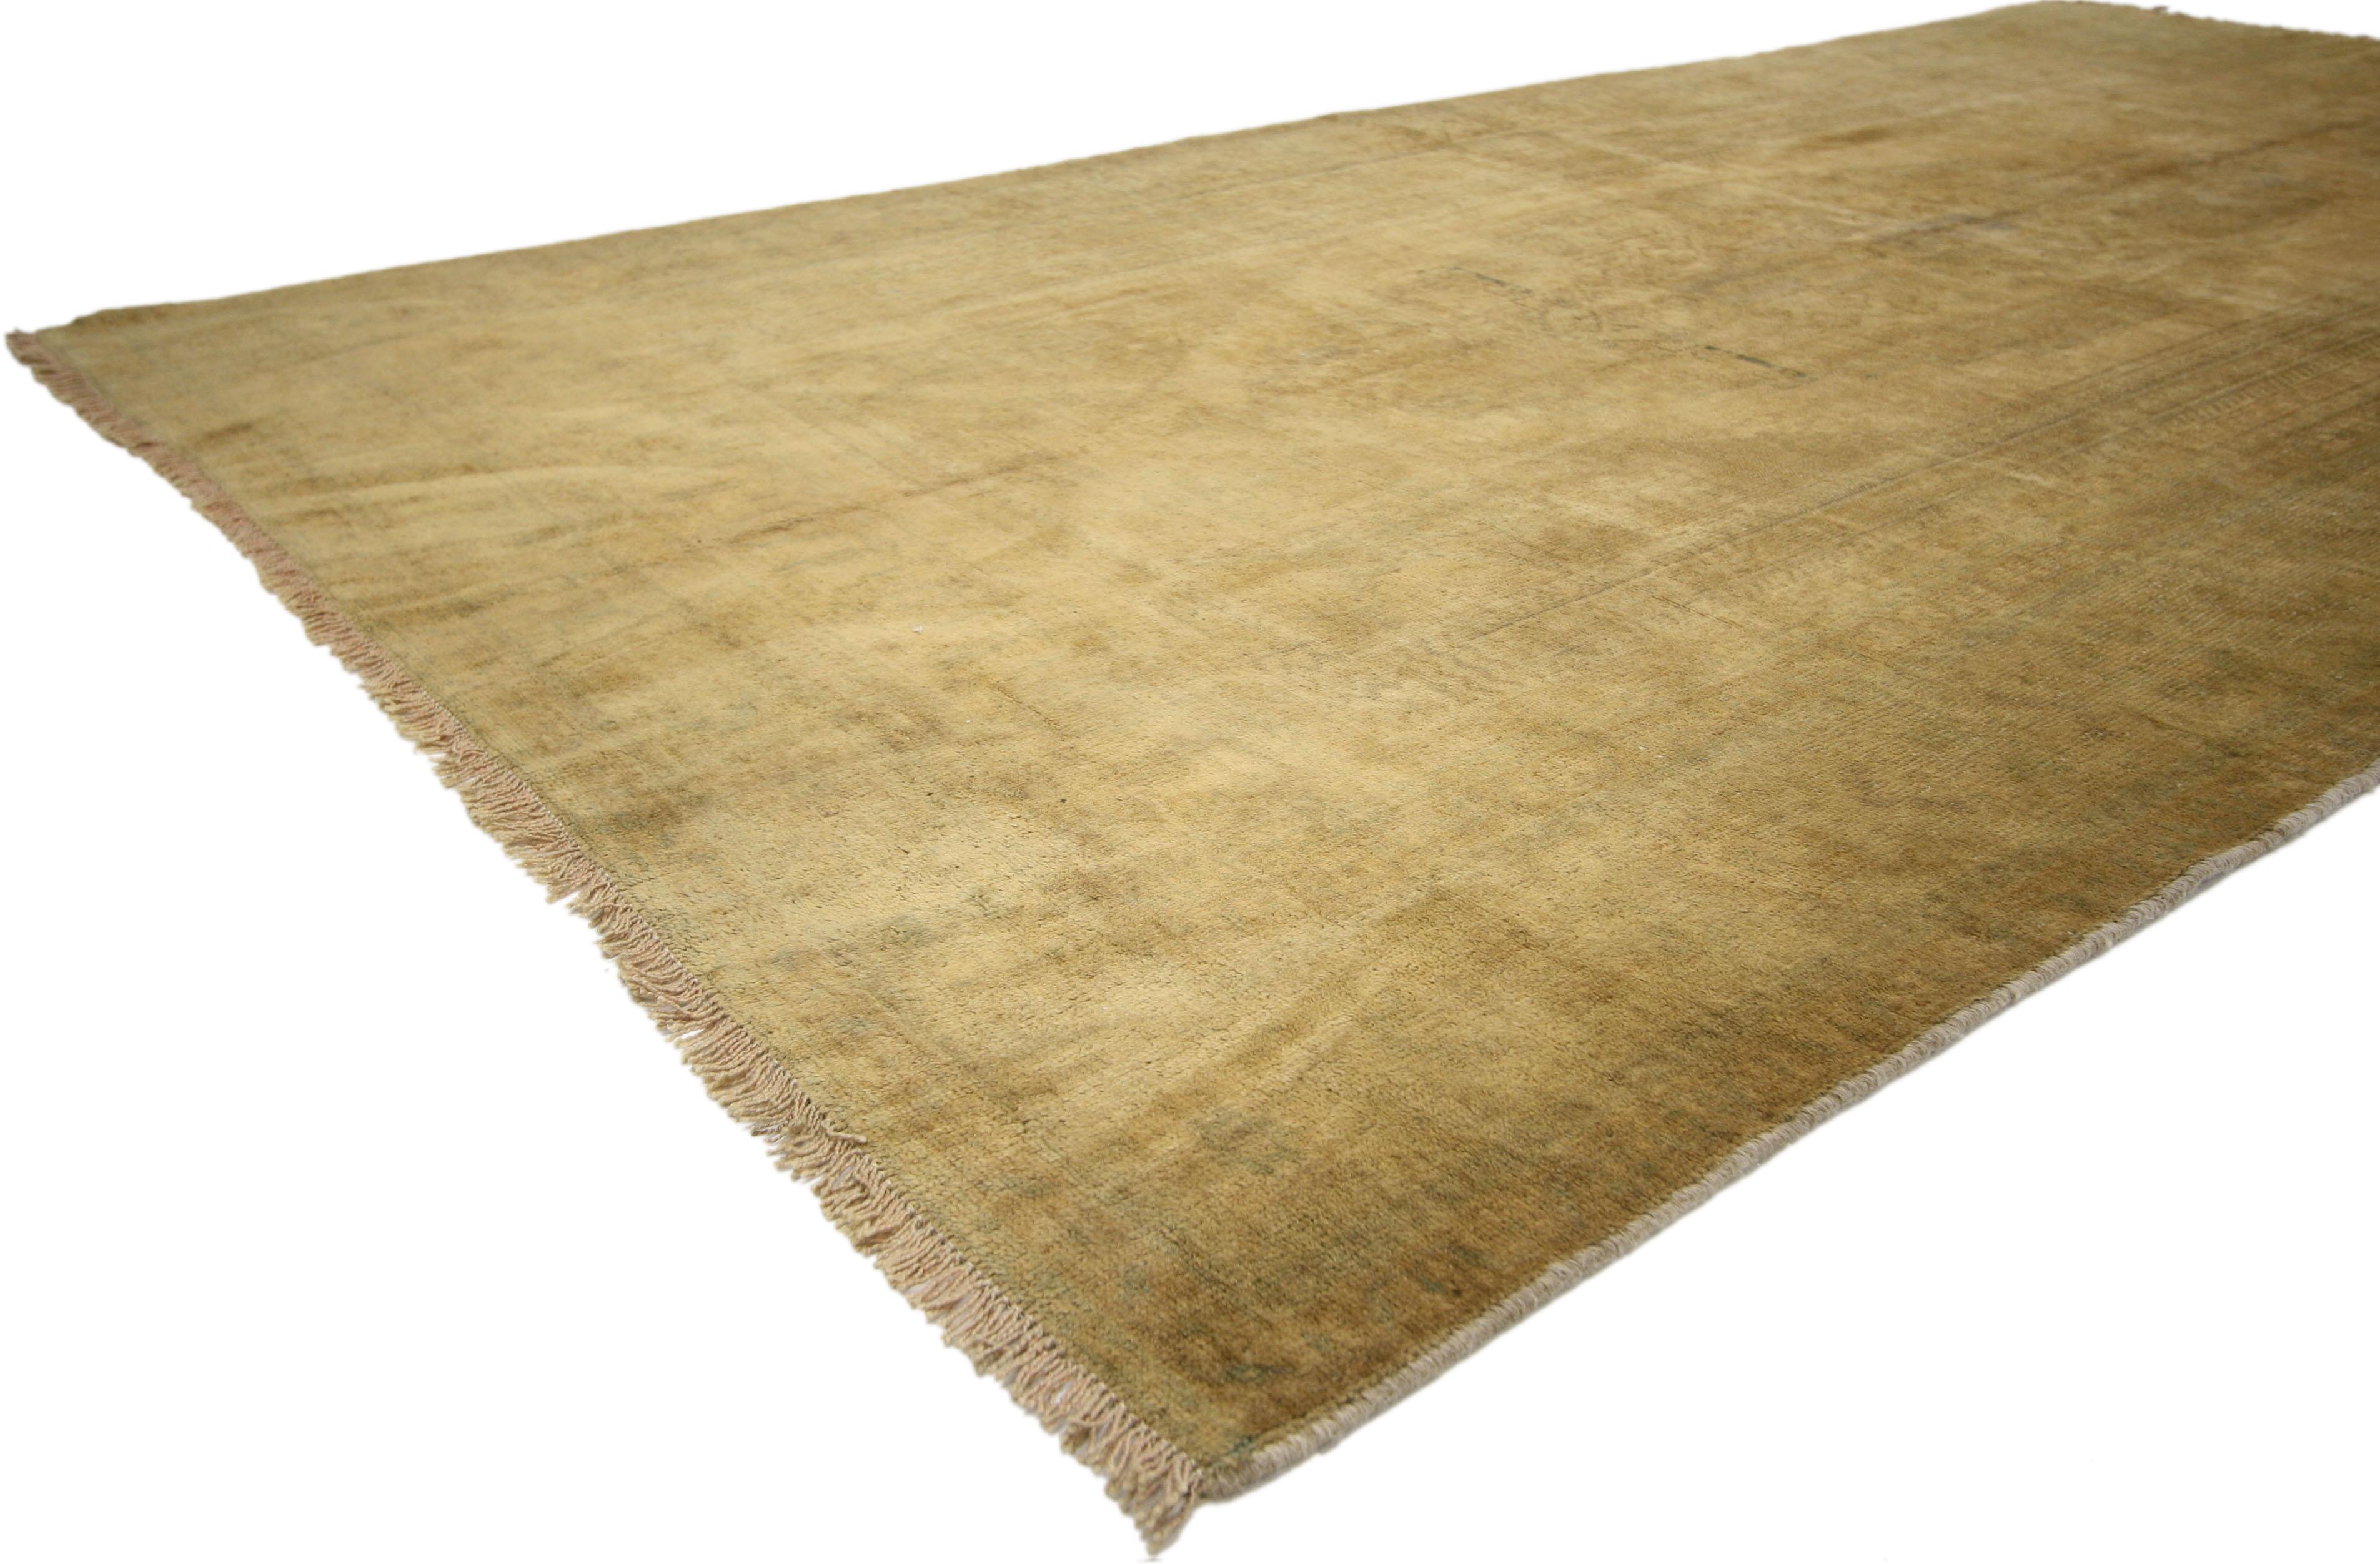 74112 Vintage Turkish Oushak Gallery rug with Amish Shaker style in Earth-Tone Colors 05'06 x 10'01. In this hand knotted wool vintage Turkish Oushak gallery rug, we bare witness to the successful application of design principles touted by the